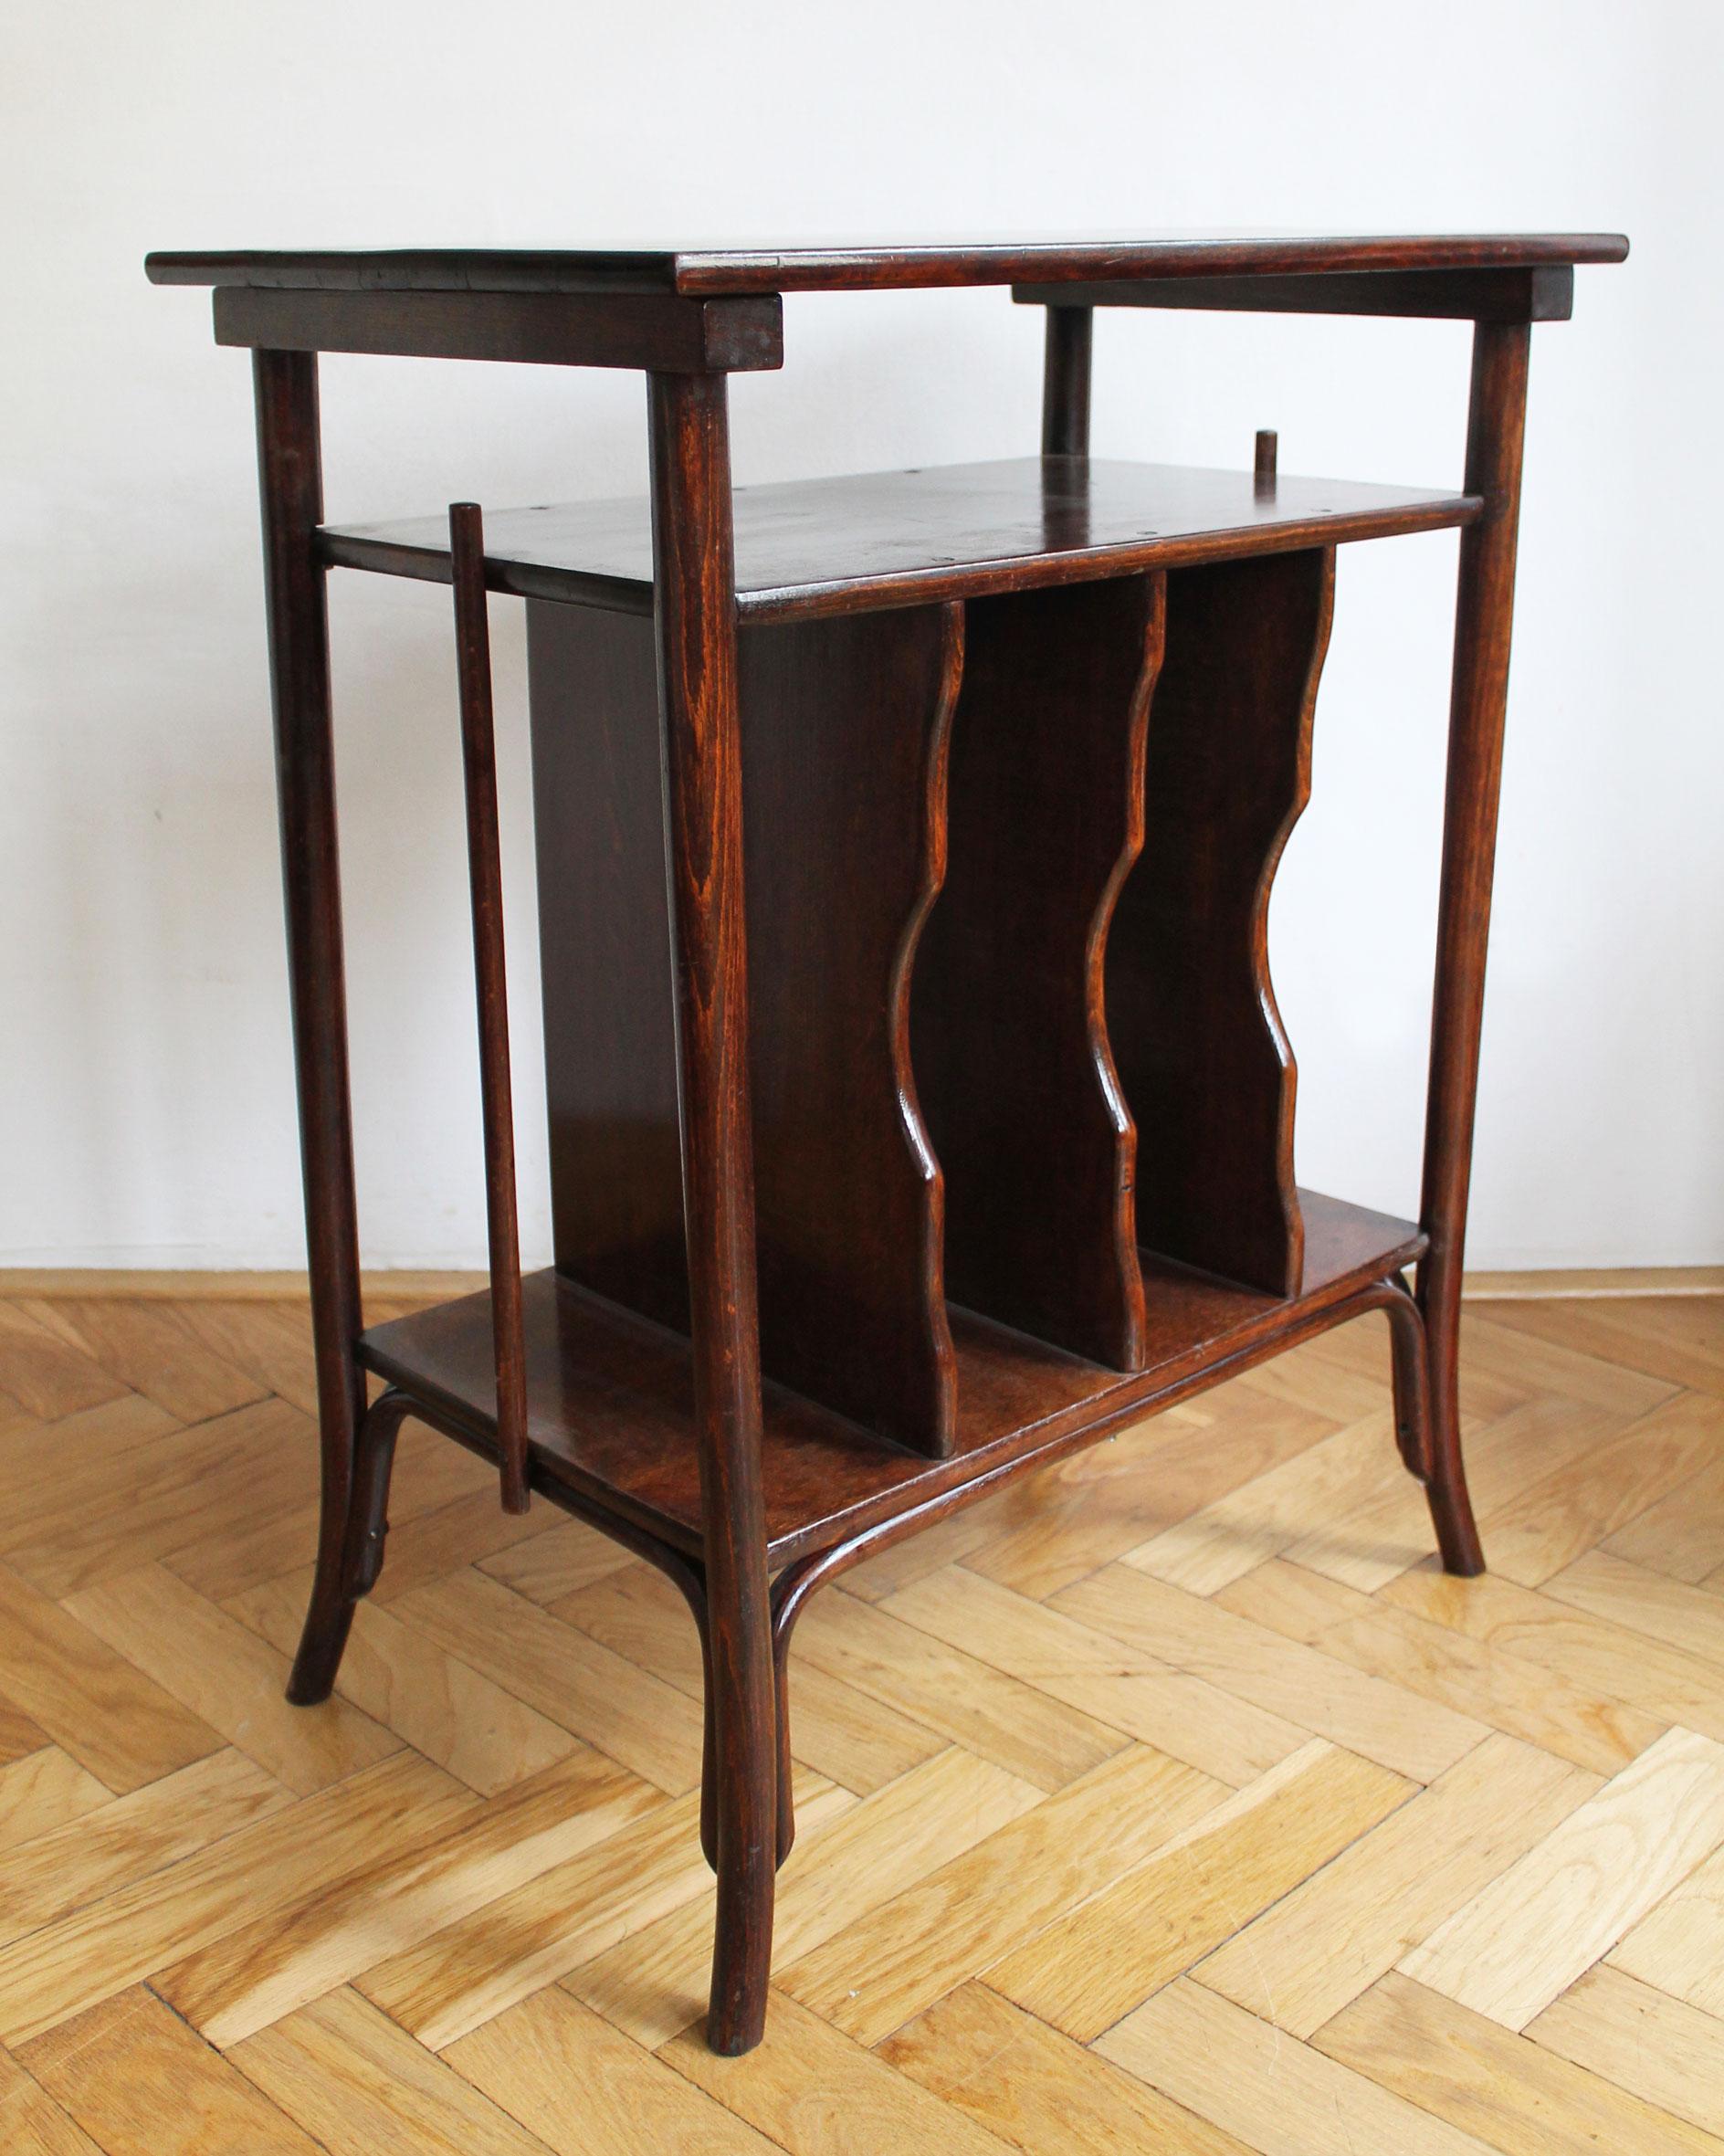 An original Art Nouveau table designed by Michael Thonet and produced as model no. 11611 by Gebrüder Thonet. The table can be found in catalogues dating back to the end of the 19th century, and this particular piece is believed to be produced around